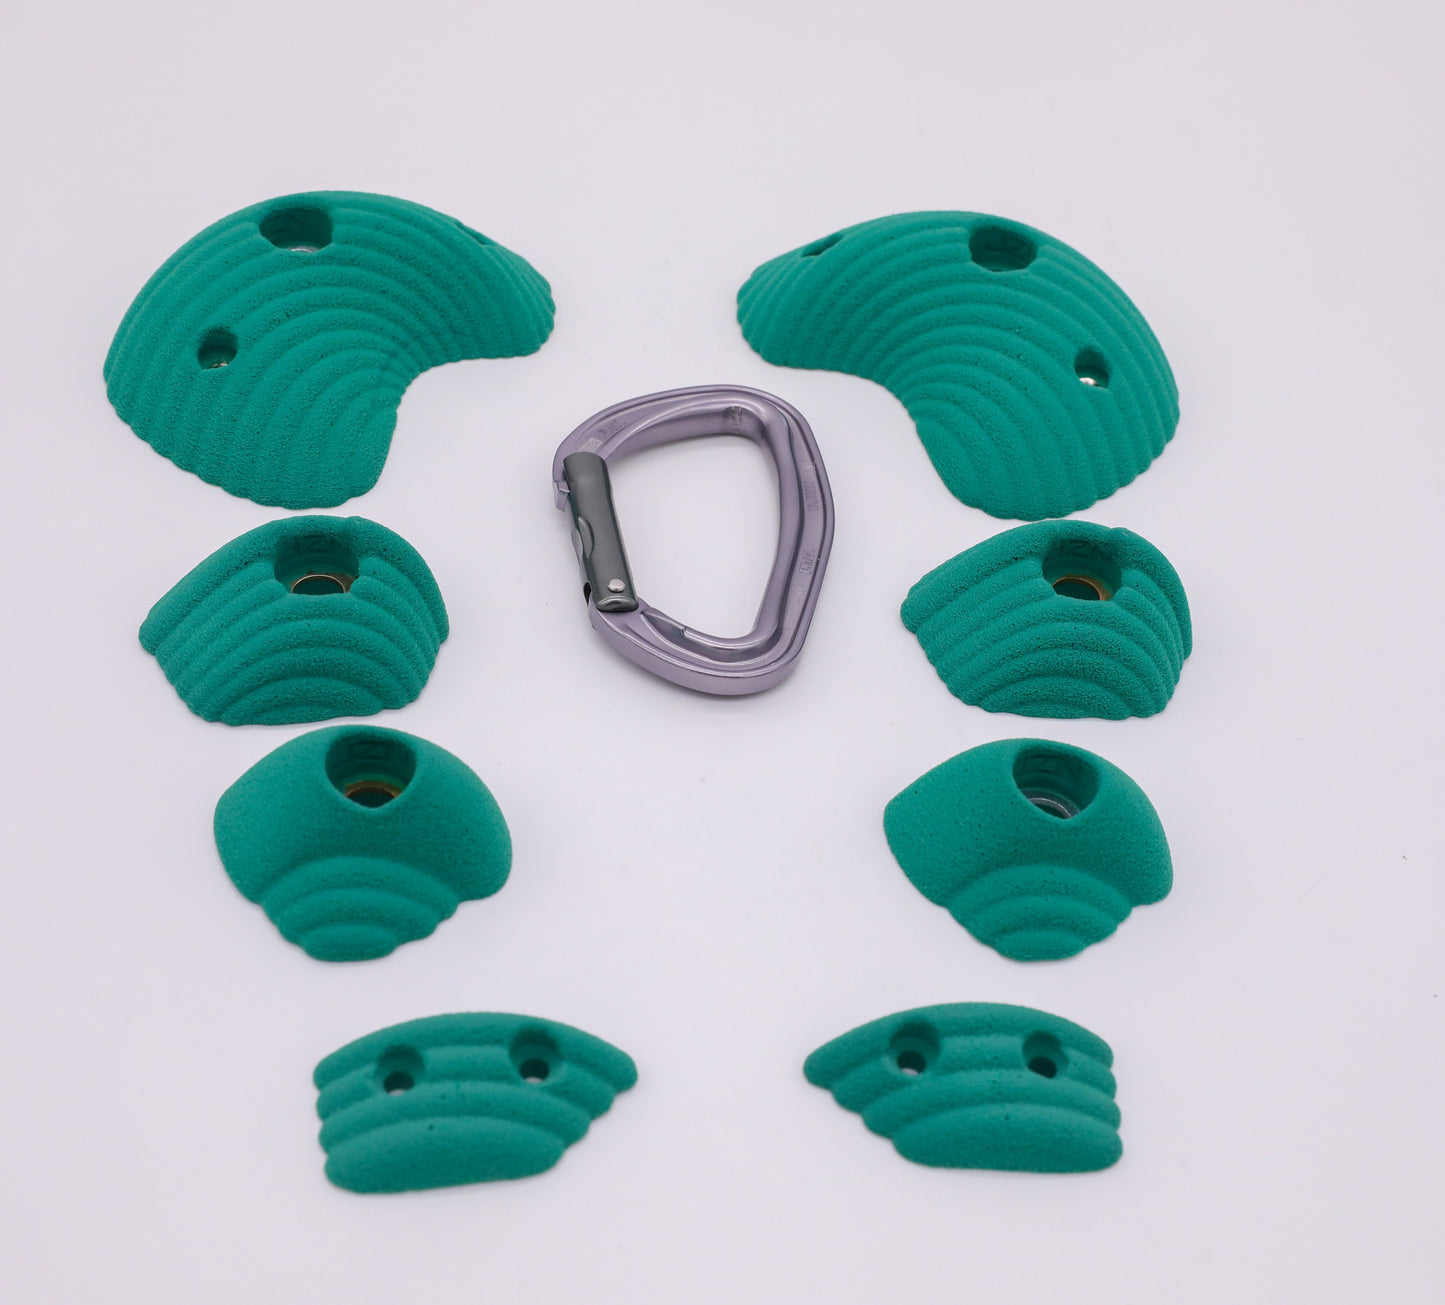 Bolt On Climbing Holds, Swarm Foot Holds Set